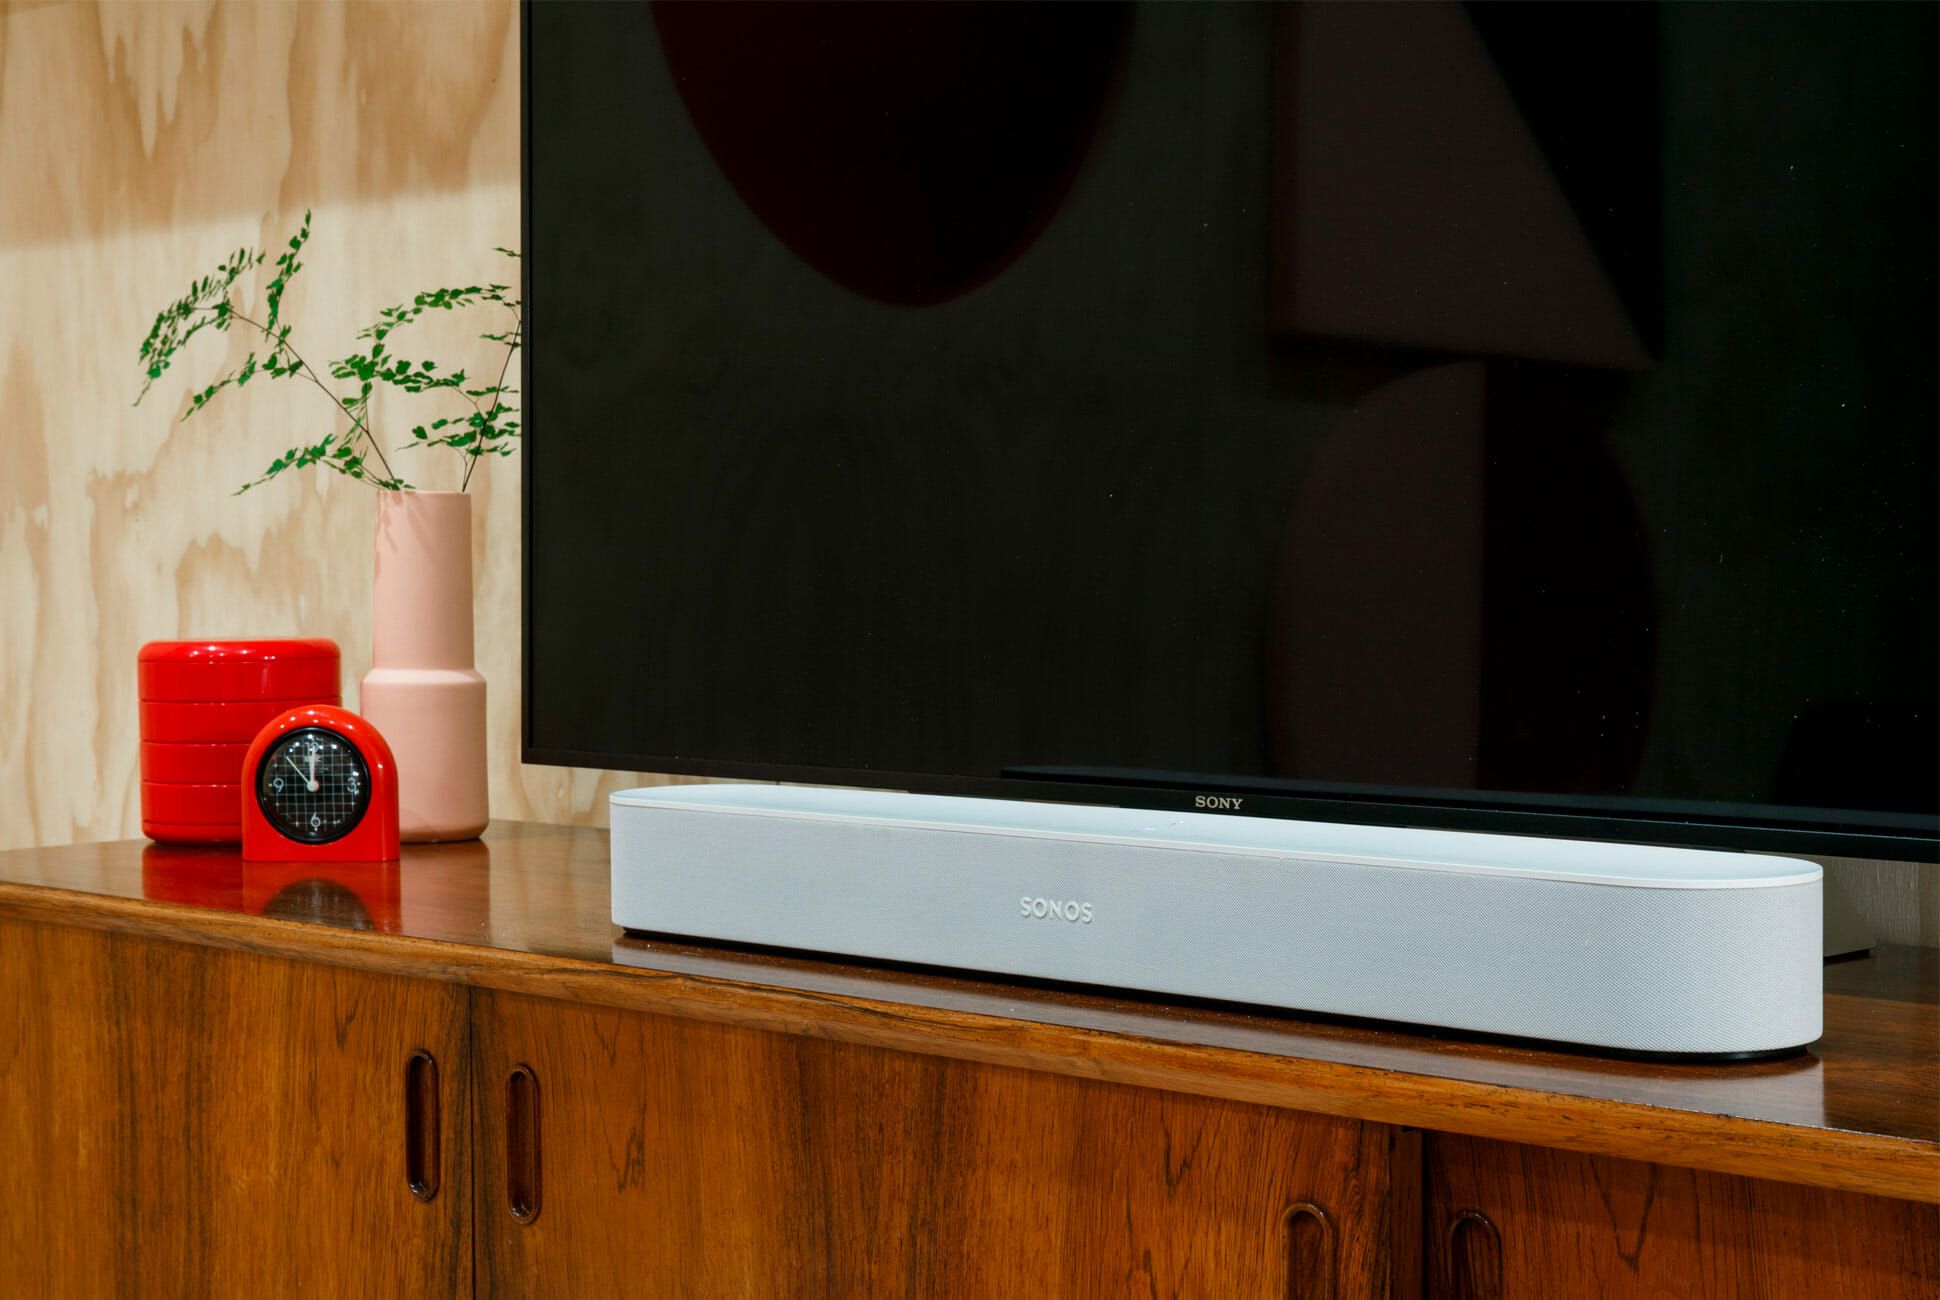 Ernest Shackleton laver mad Blandet Opinion: Forget Every Other Soundbar And Just Buy This